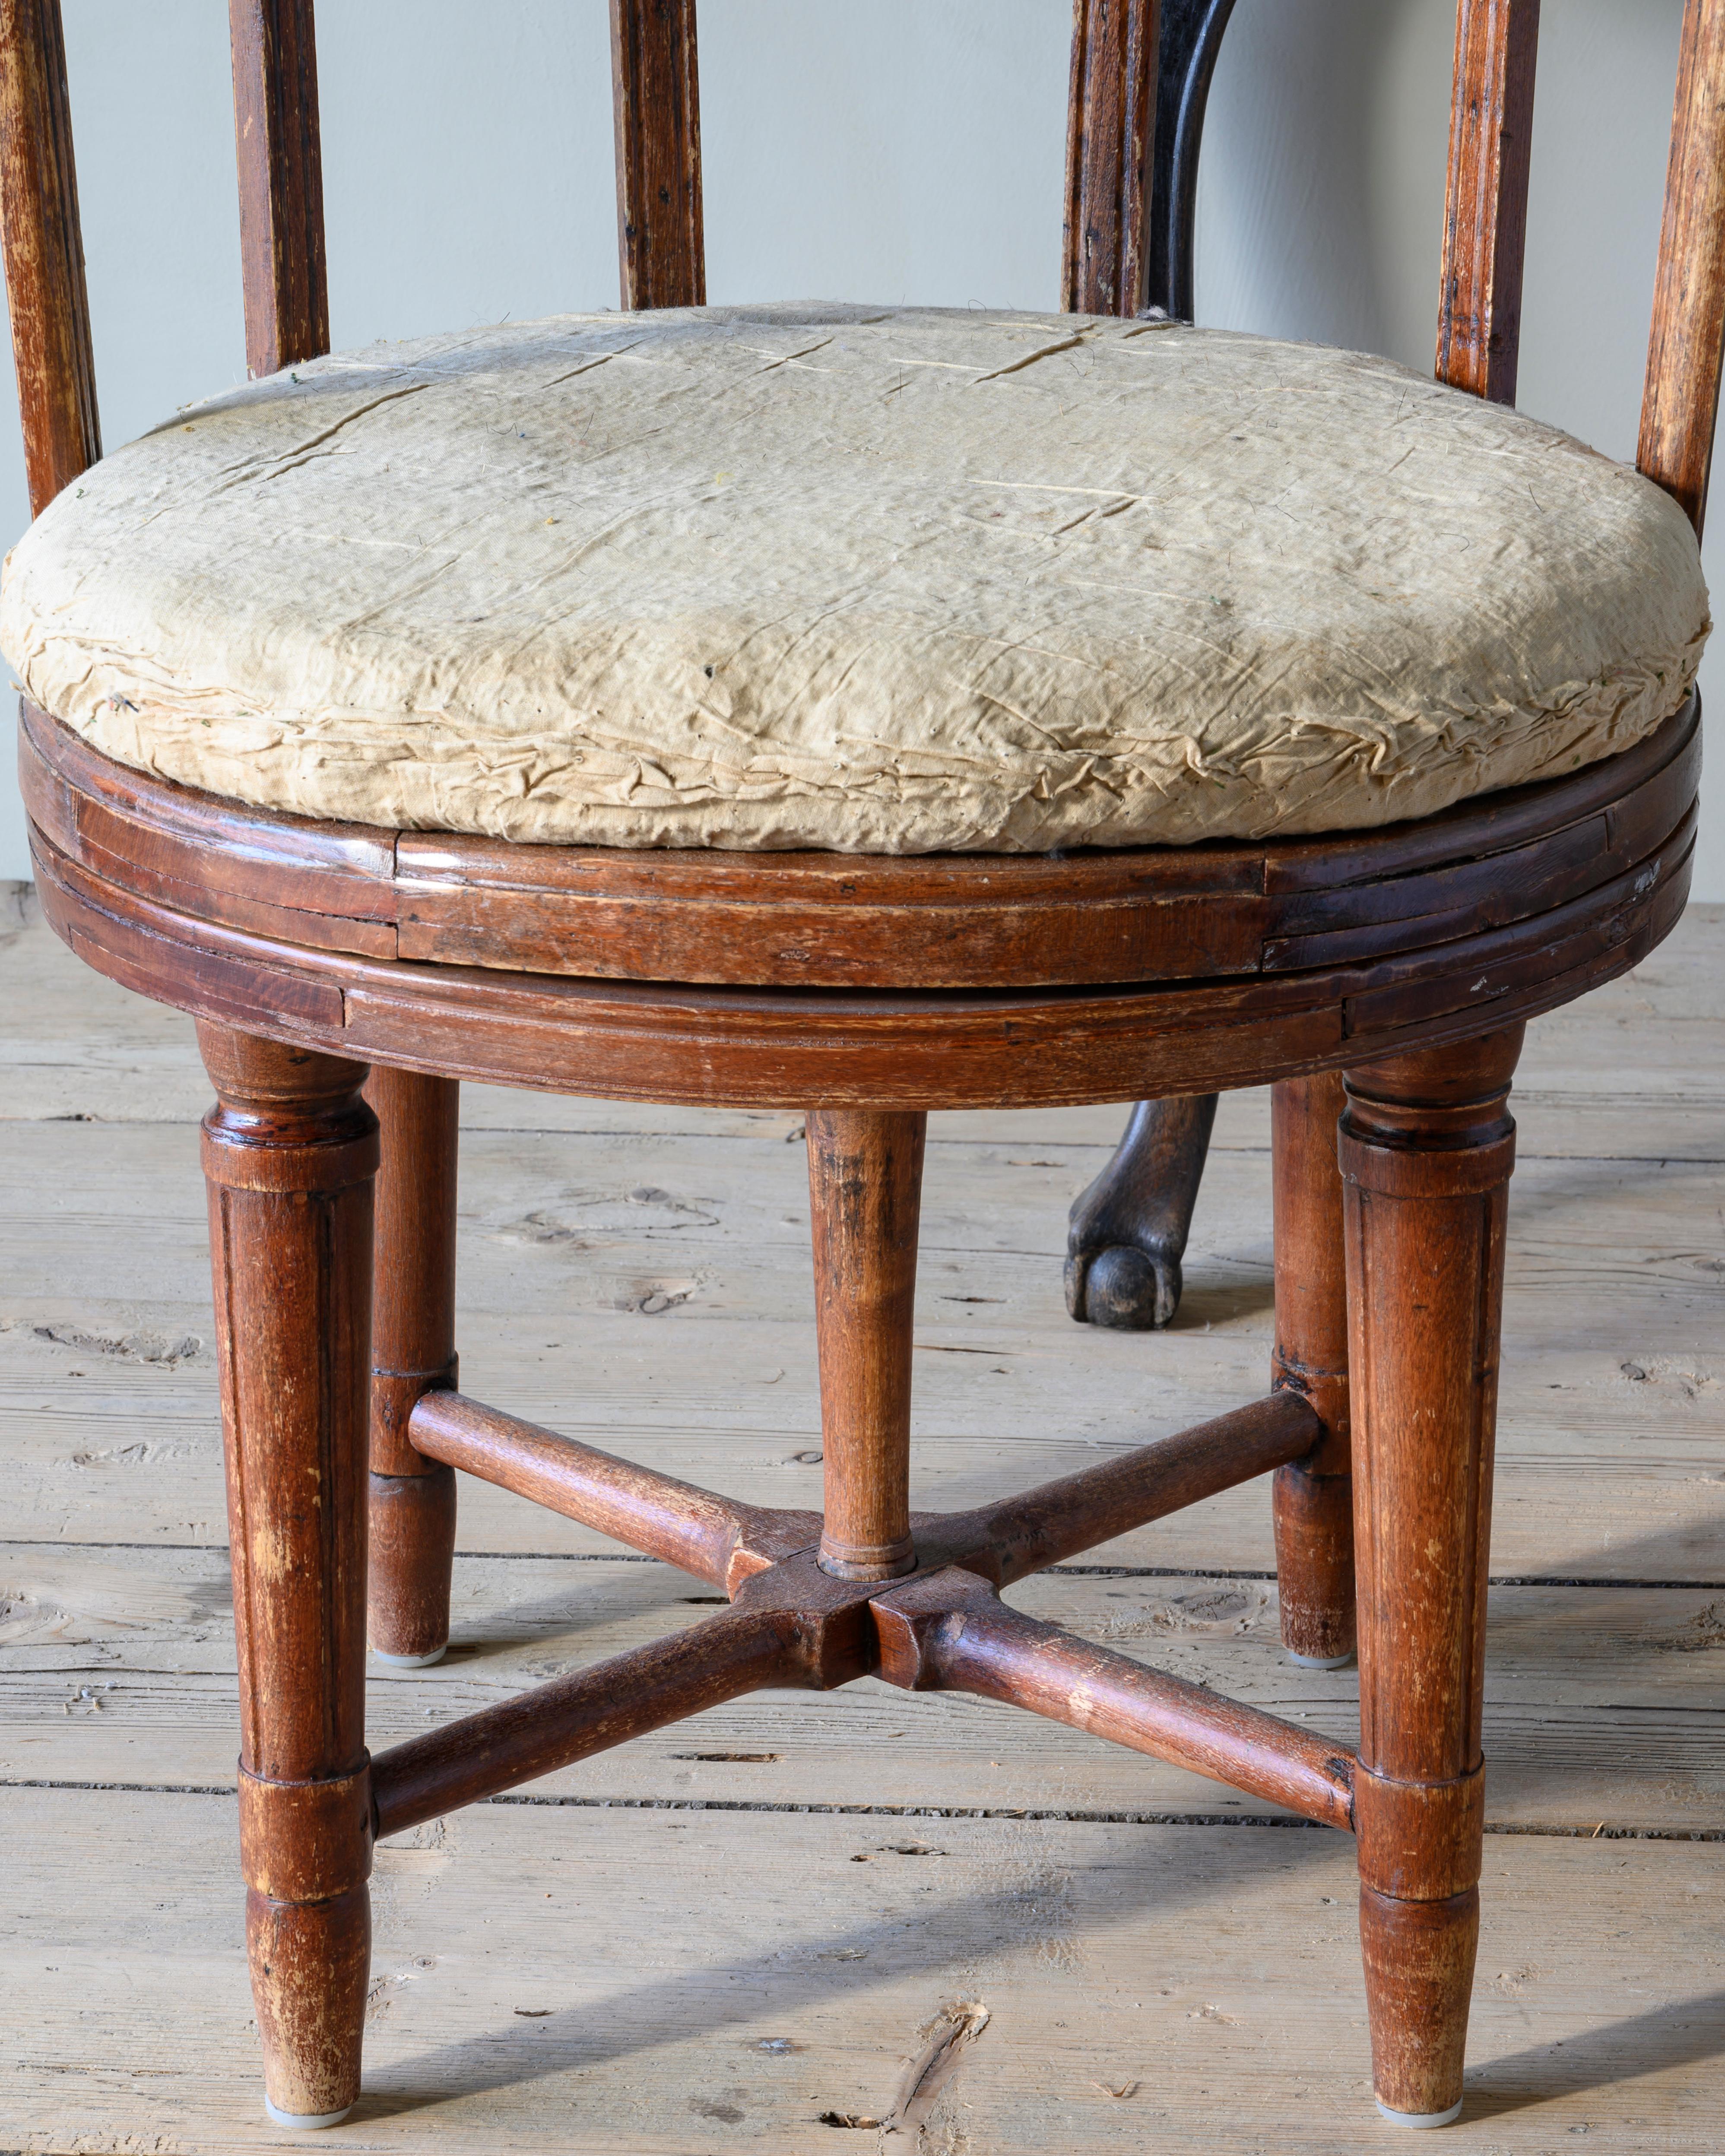 Hand-Crafted 19th Century Gustavian Revolving Desk Chair For Sale